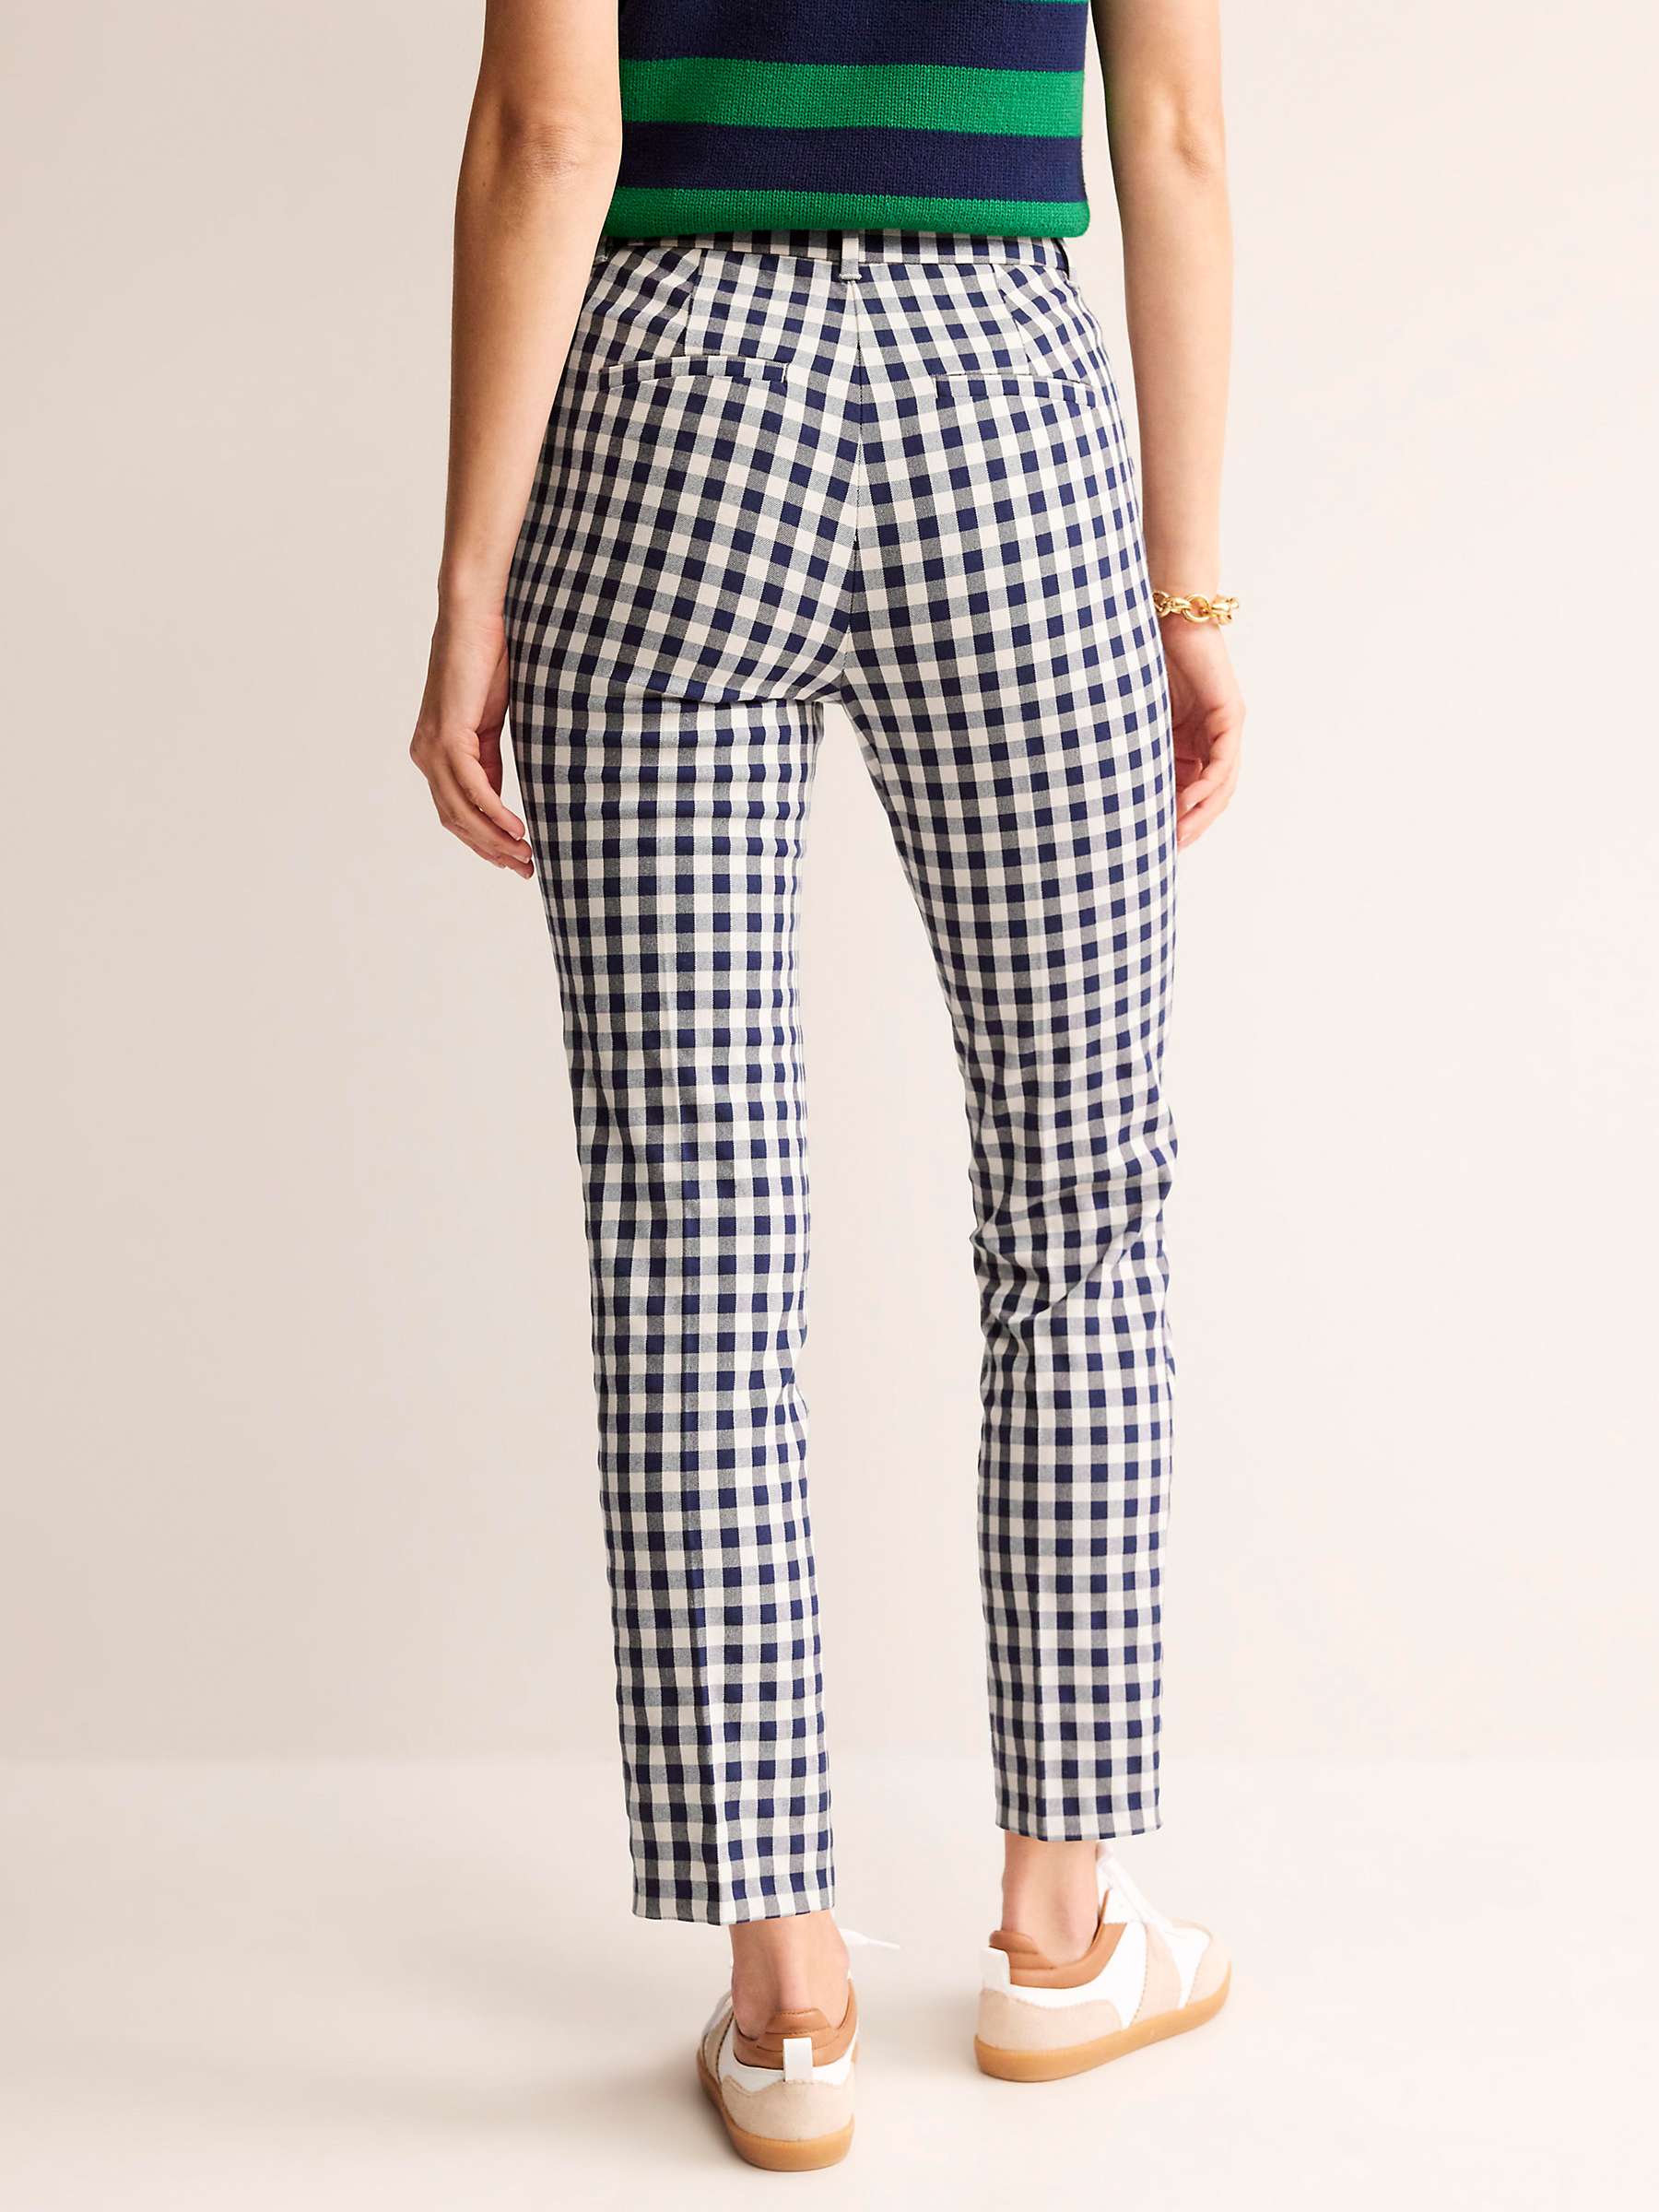 Buy Boden Highgate Slim Fit Trousers, Navy/Stone Gingham Online at johnlewis.com